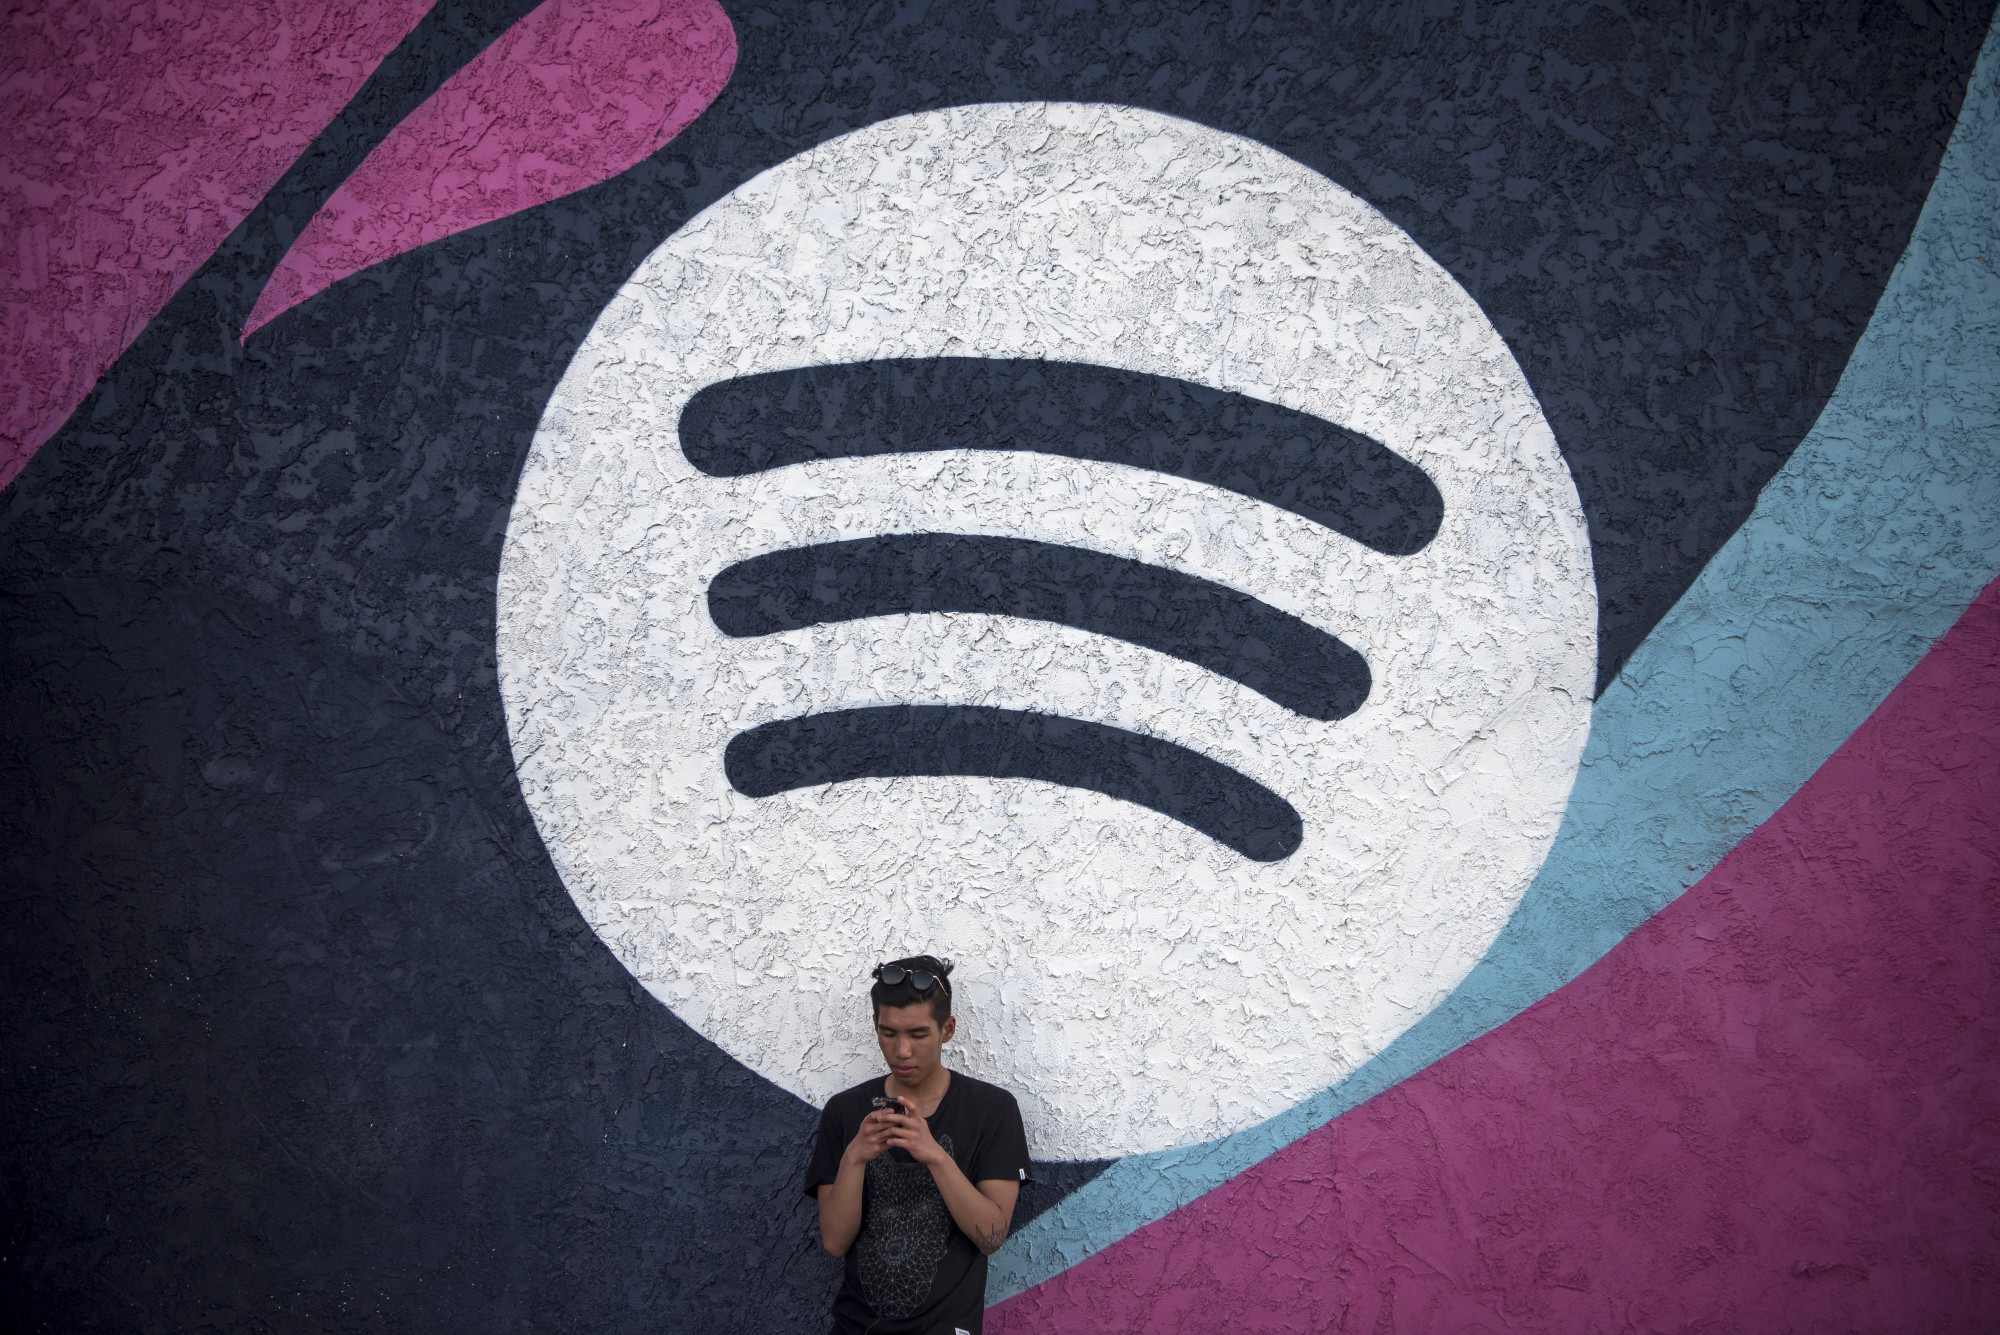 Spotify Adds More Users Than Expected, Warding Off Competition